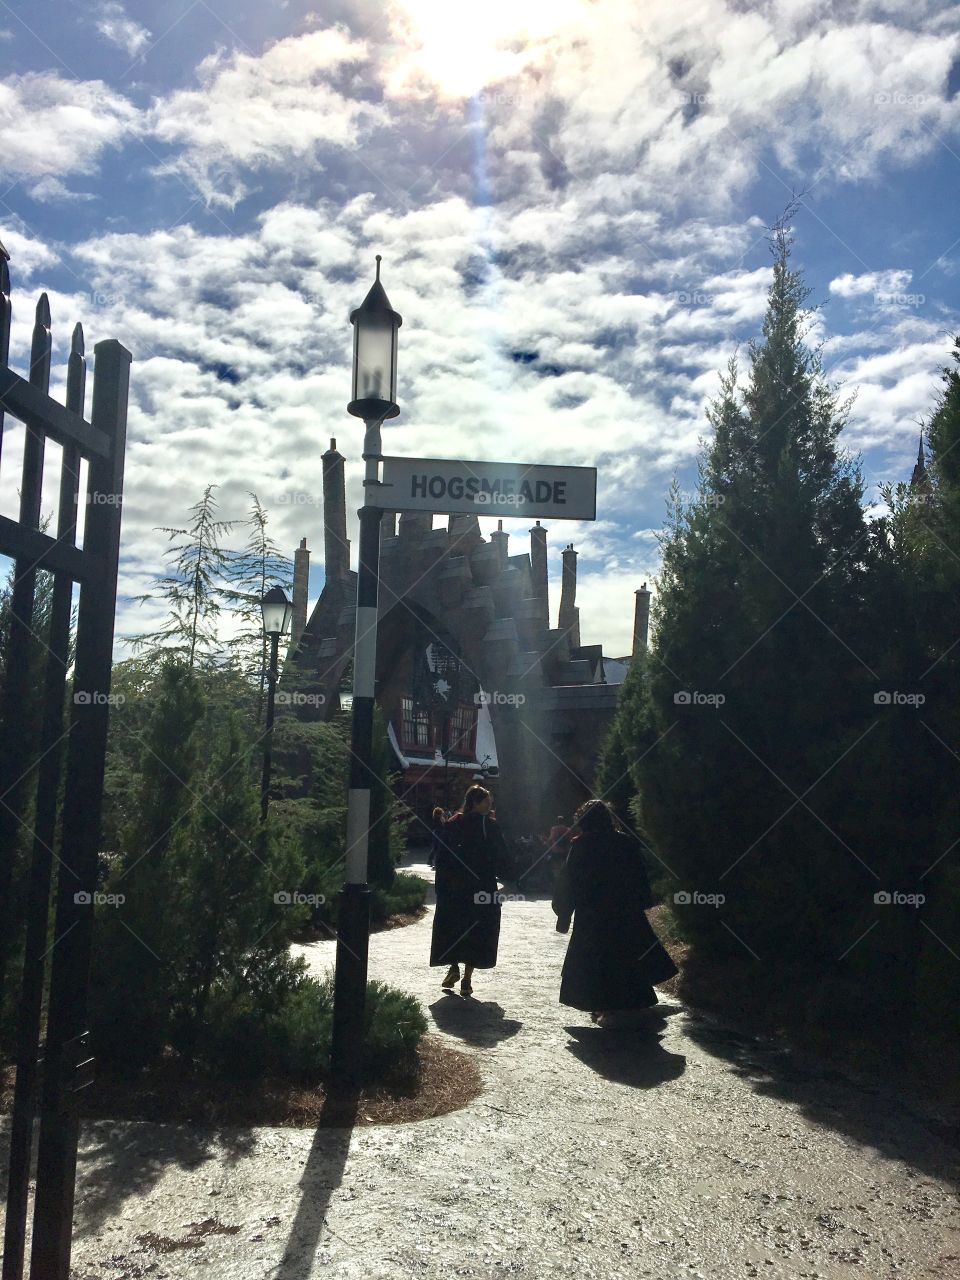 The road to Hogsmeade